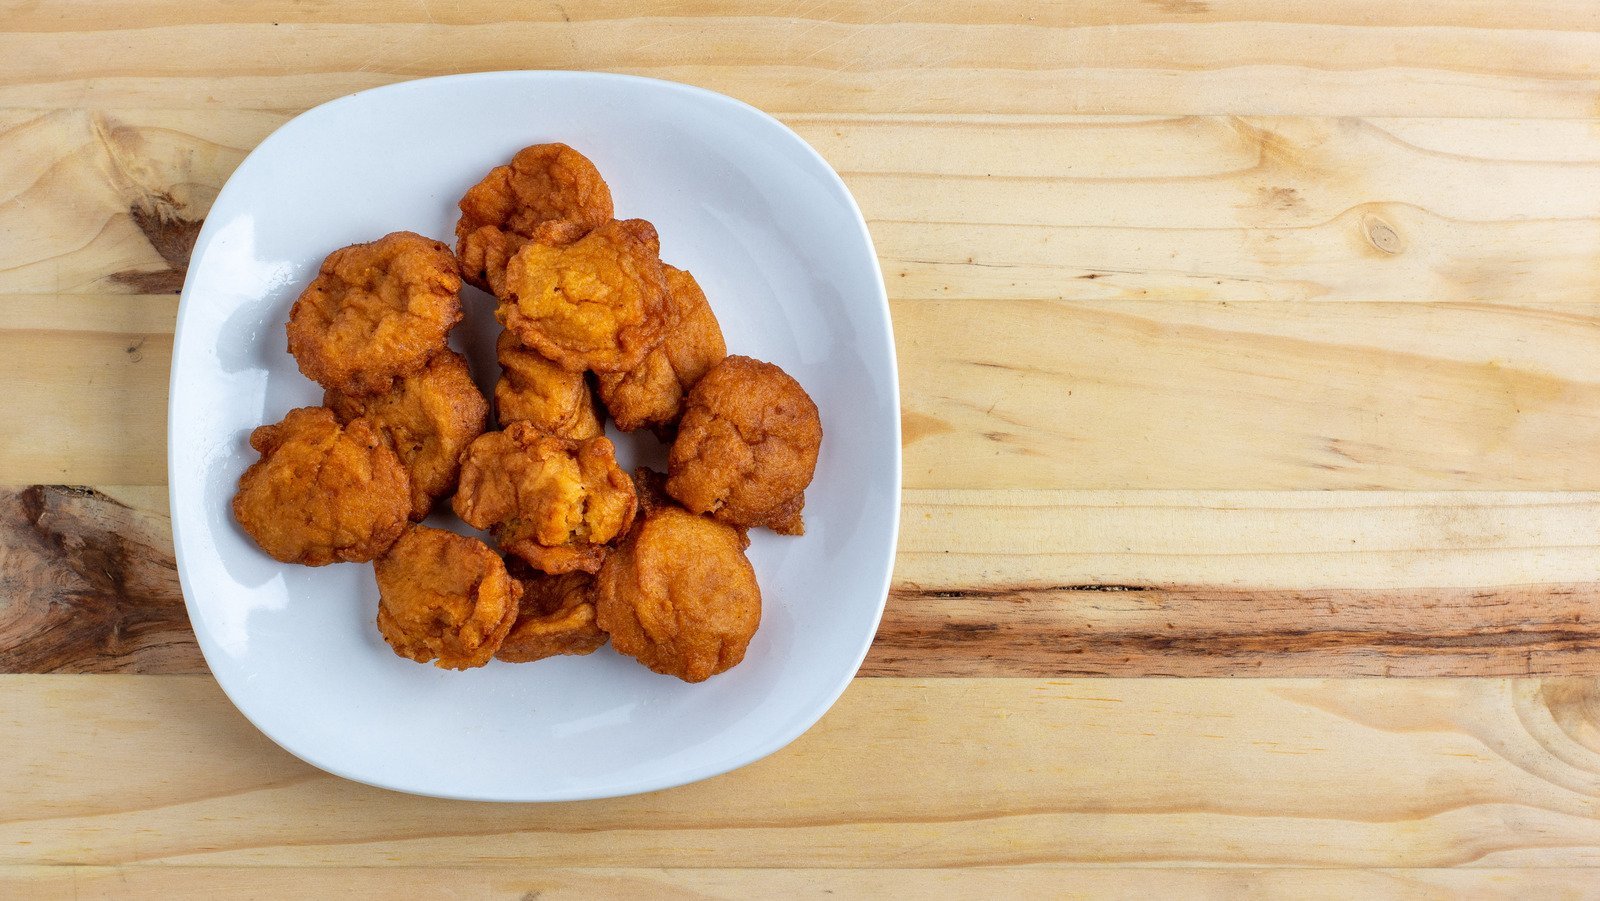 Akara: The Nigerian Breakfast Fritter You Should Know About